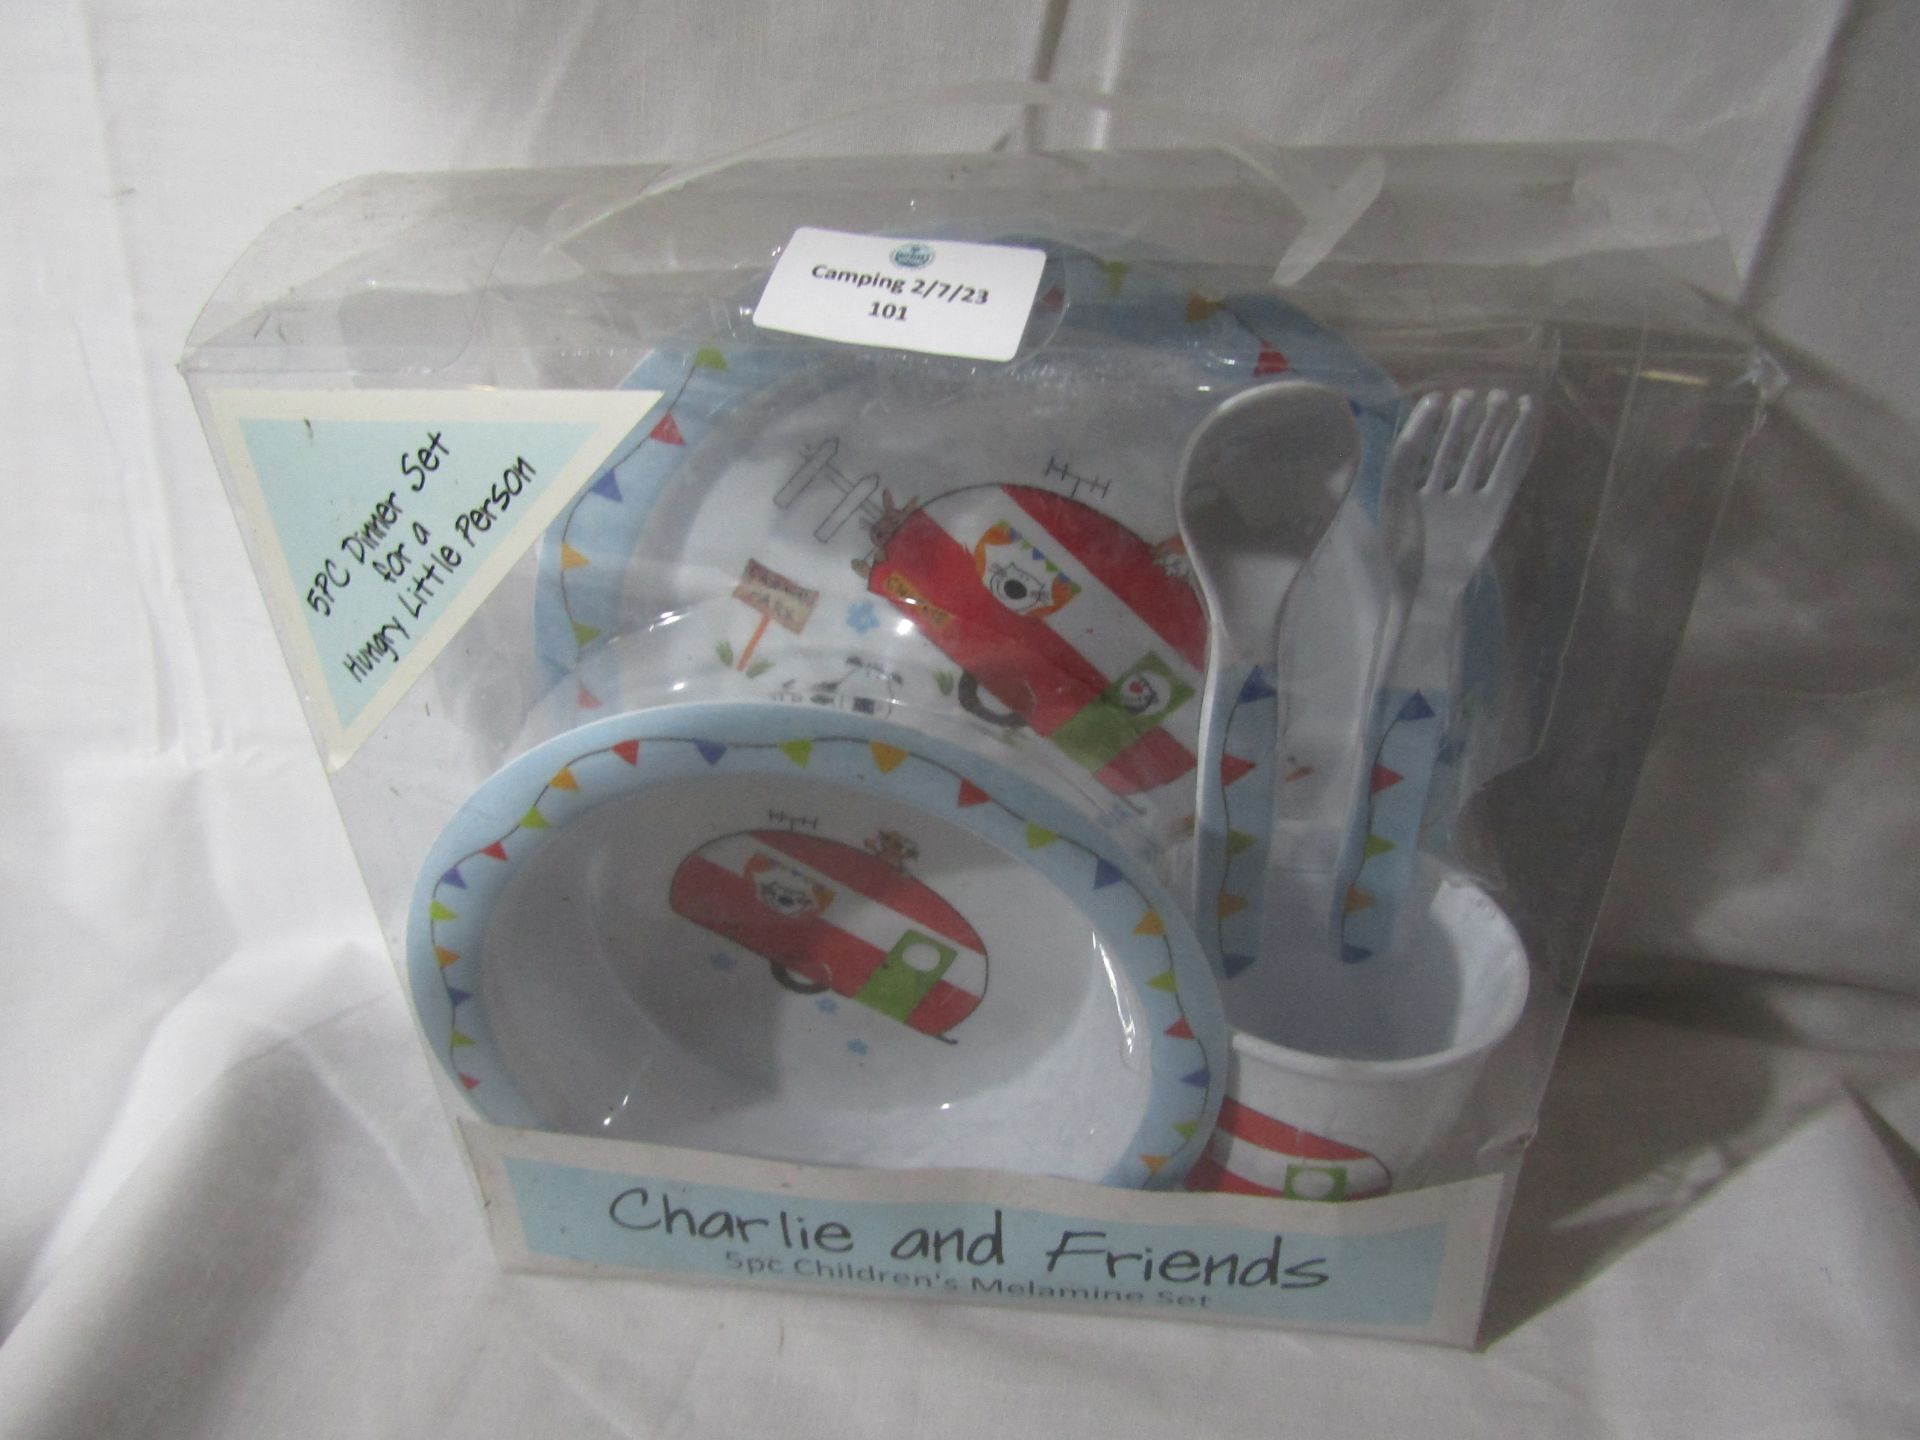 Charlie and friends 5 piece melamine crockery set, new in packaging